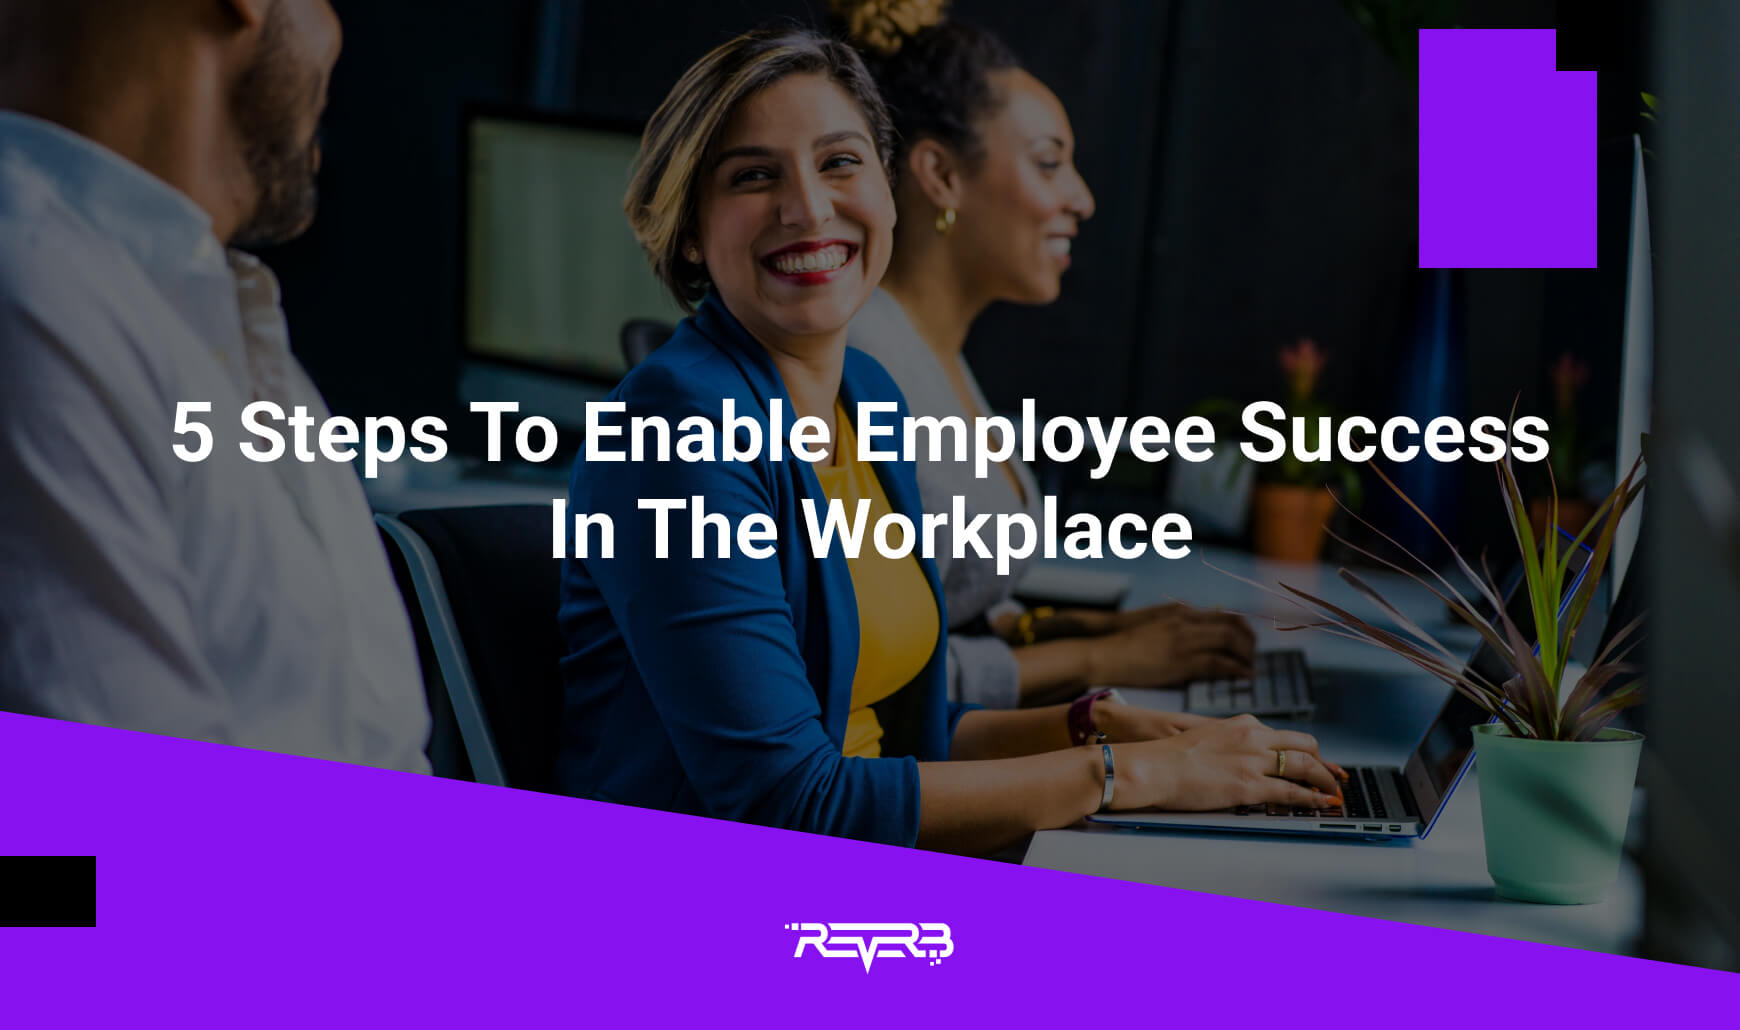 5 Steps To Enable Employee Success In The Workplace | REVERB